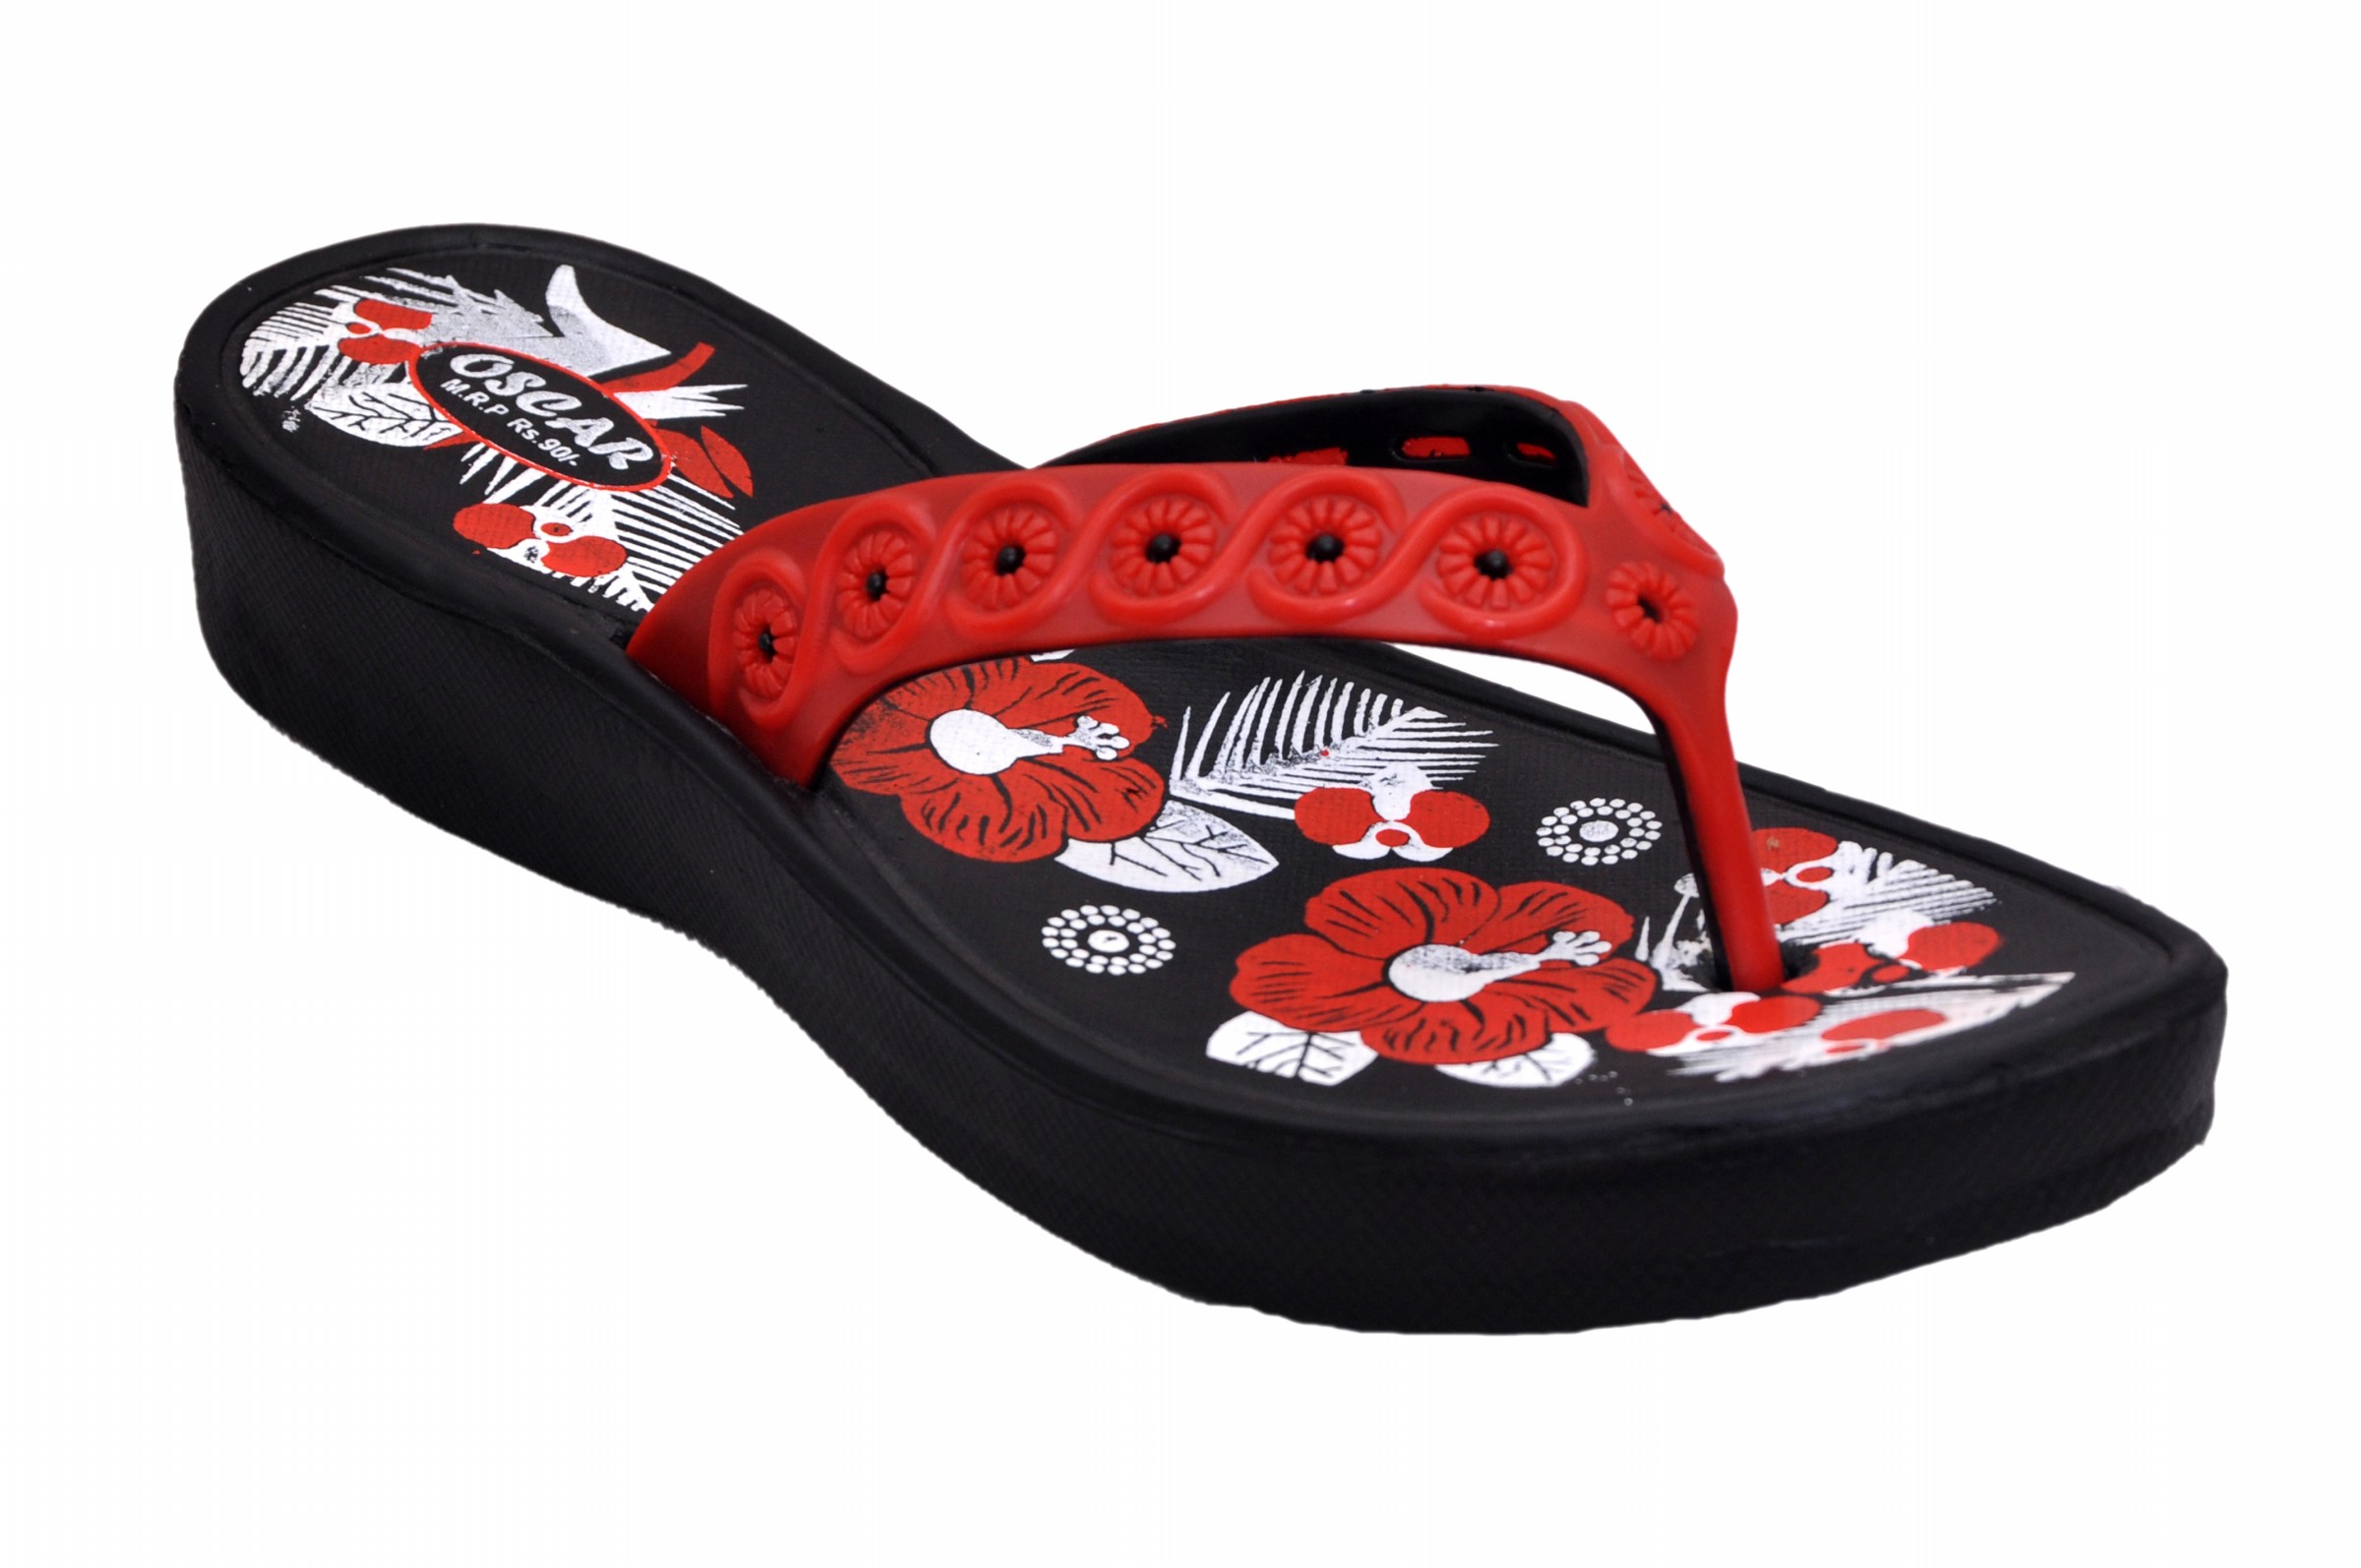 Buy Mdi Red Womens Slippers Online @ ₹199 from ShopClues